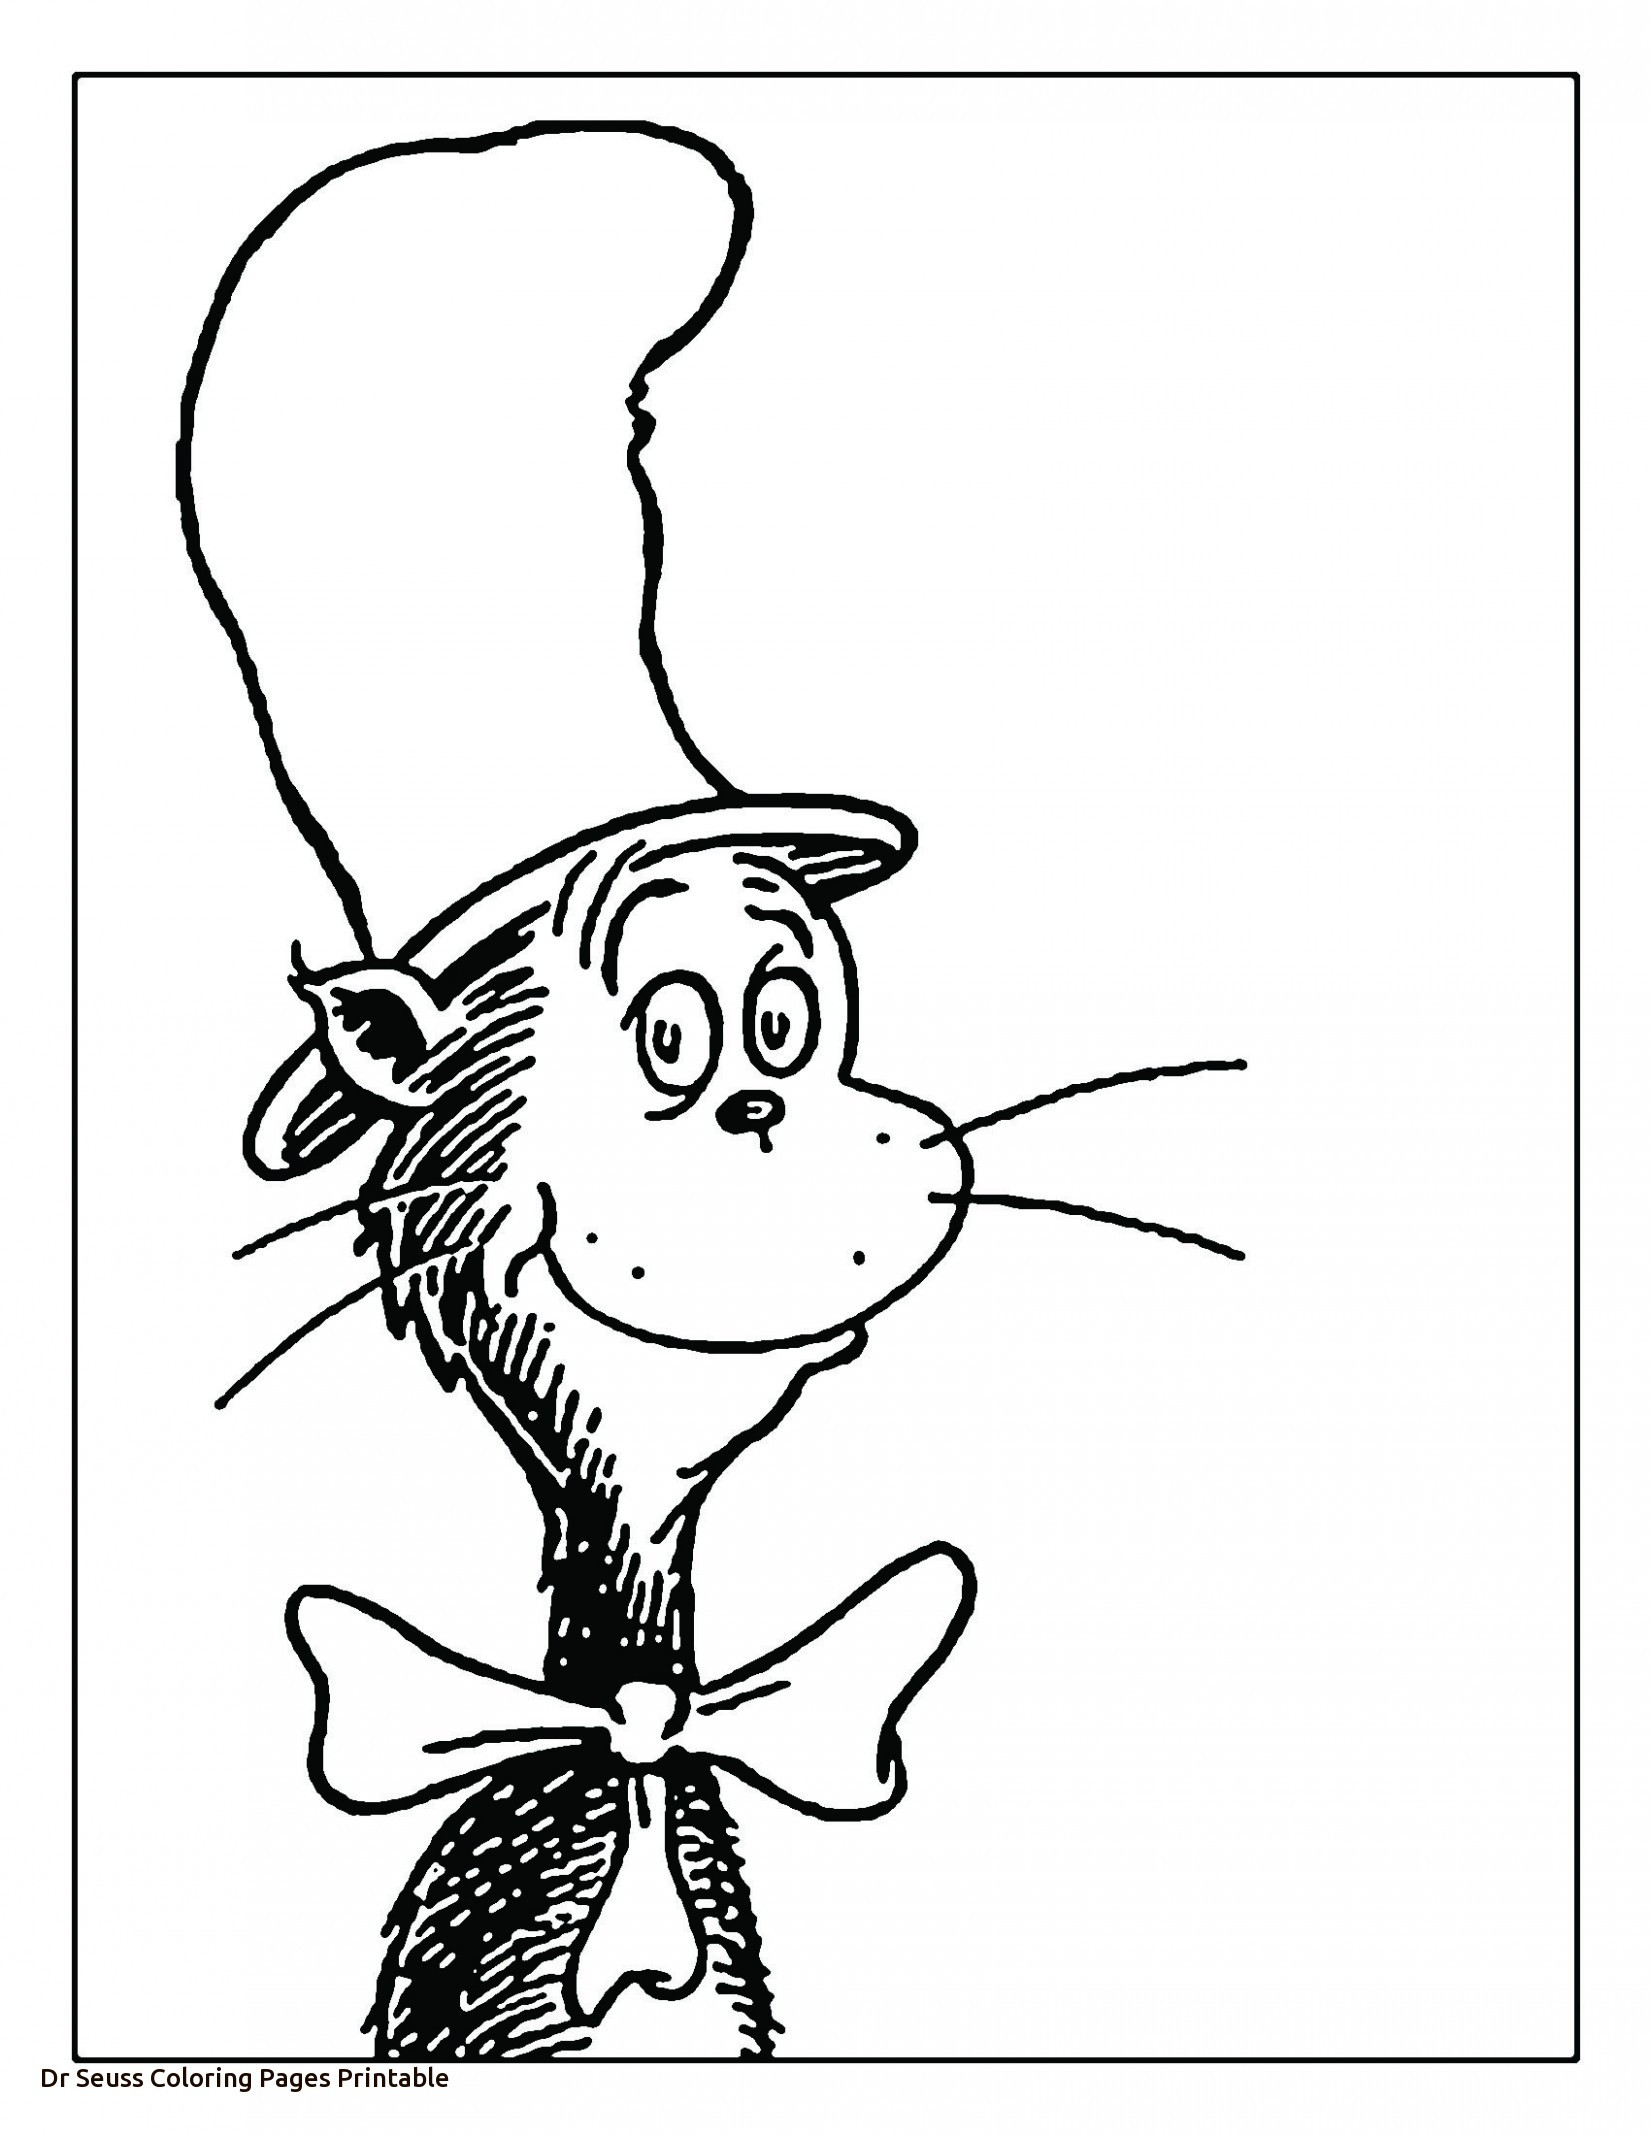 Free Dr Seuss Coloring Pages Peaceful Design Ideas Dr Seuss Printable Coloring Pages Free Luxury